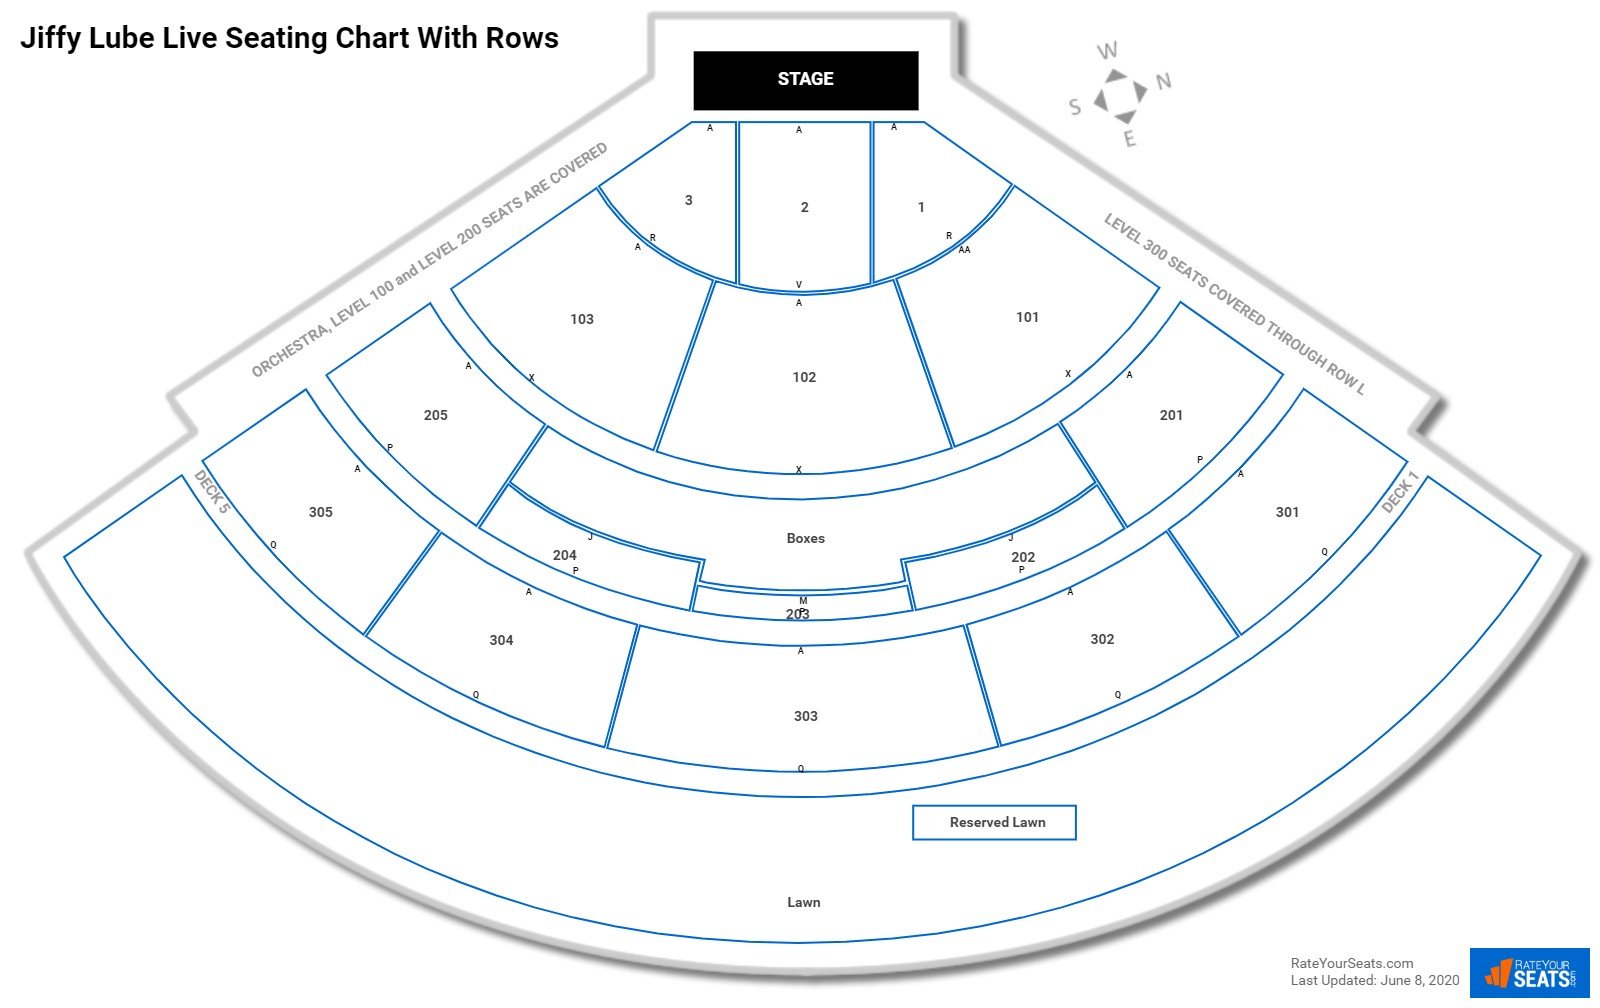 Jiffy Lube Live seating chart with row numbers